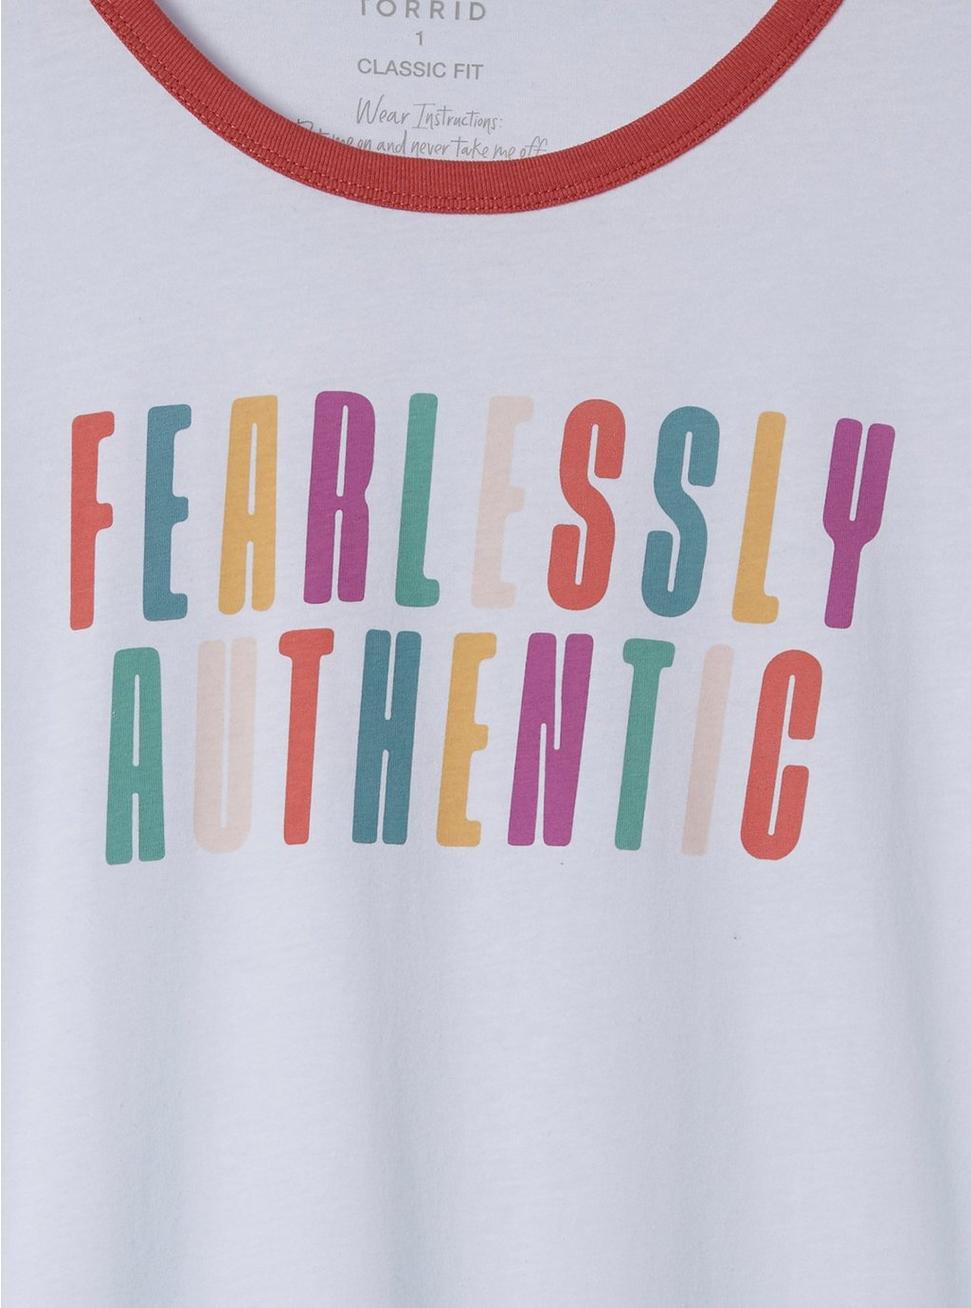 Fearless Classic Fit Cotton Crew Neck Ringer Tee, BRIGHT WHITE, alternate